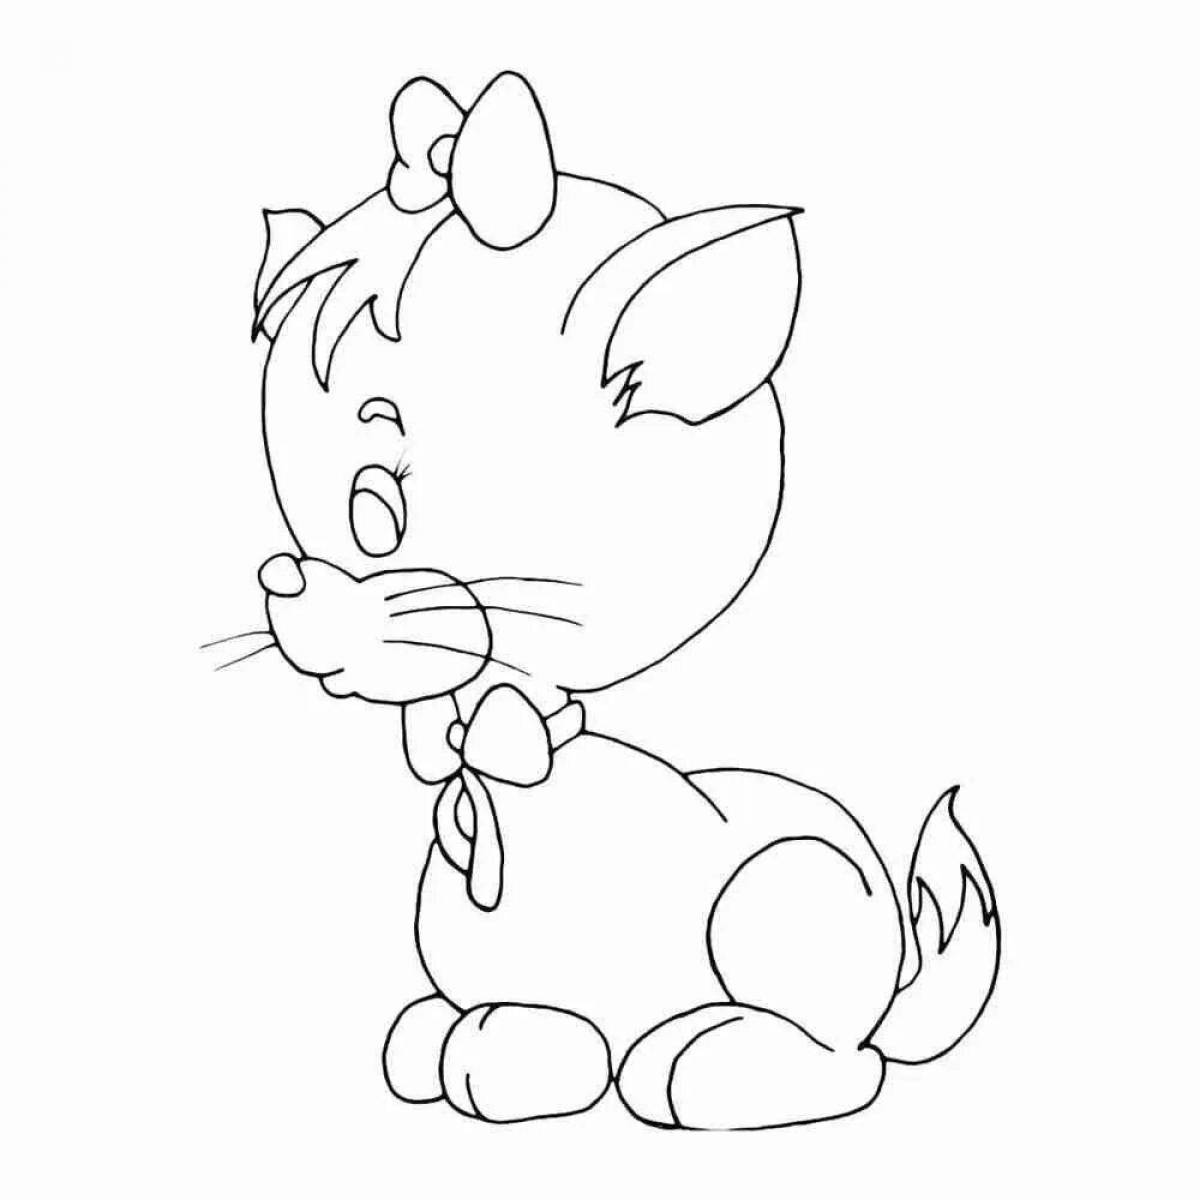 Coloring book happy kitten for children 3-4 years old